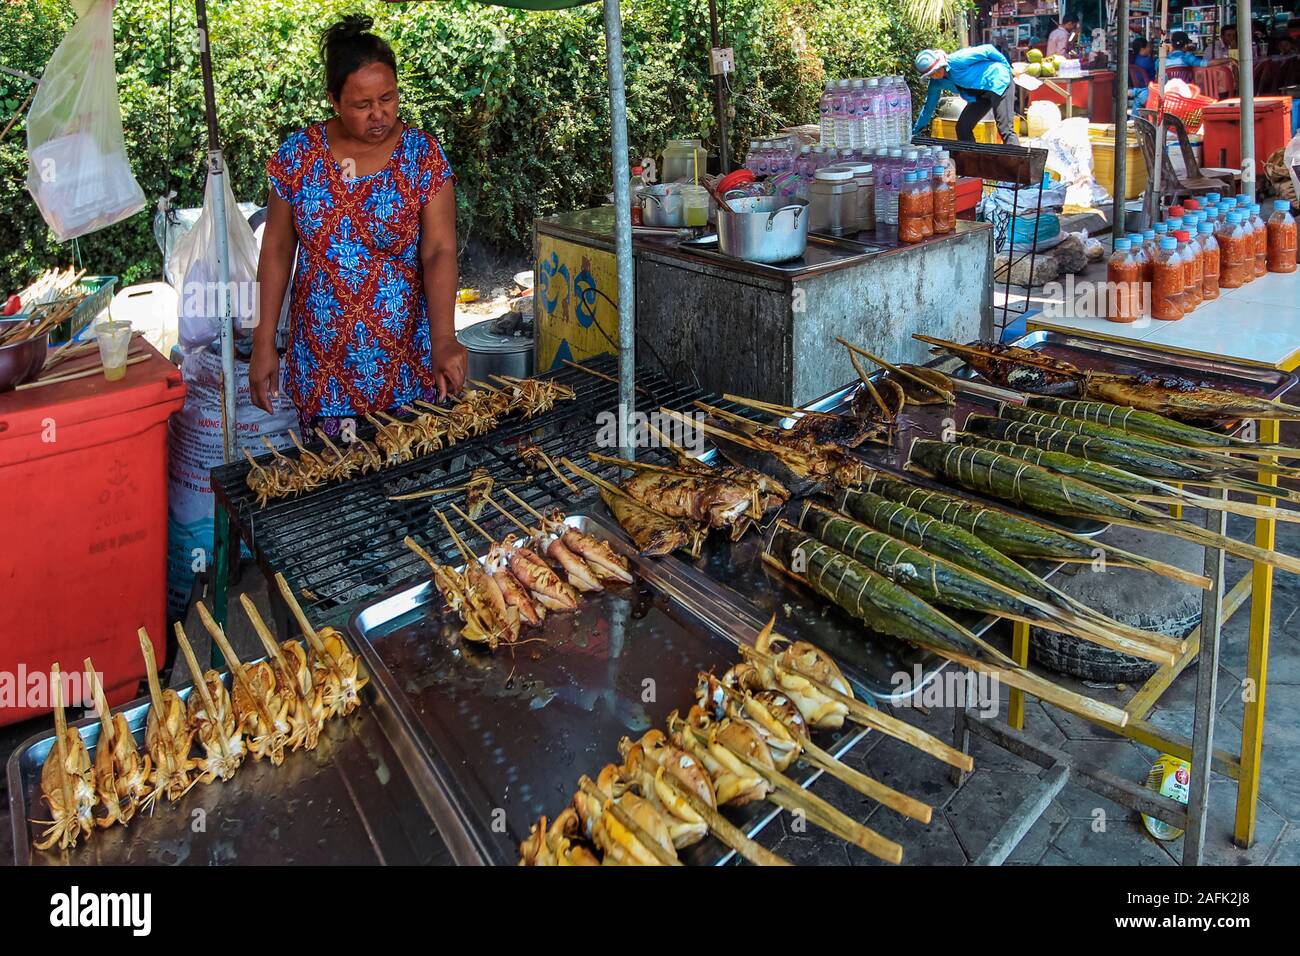 Woman with stall of barbecued fish & squid on sticks at the Crab Market in this resort town, famous for it's seafood; Kep, Cambodia Stock Photo